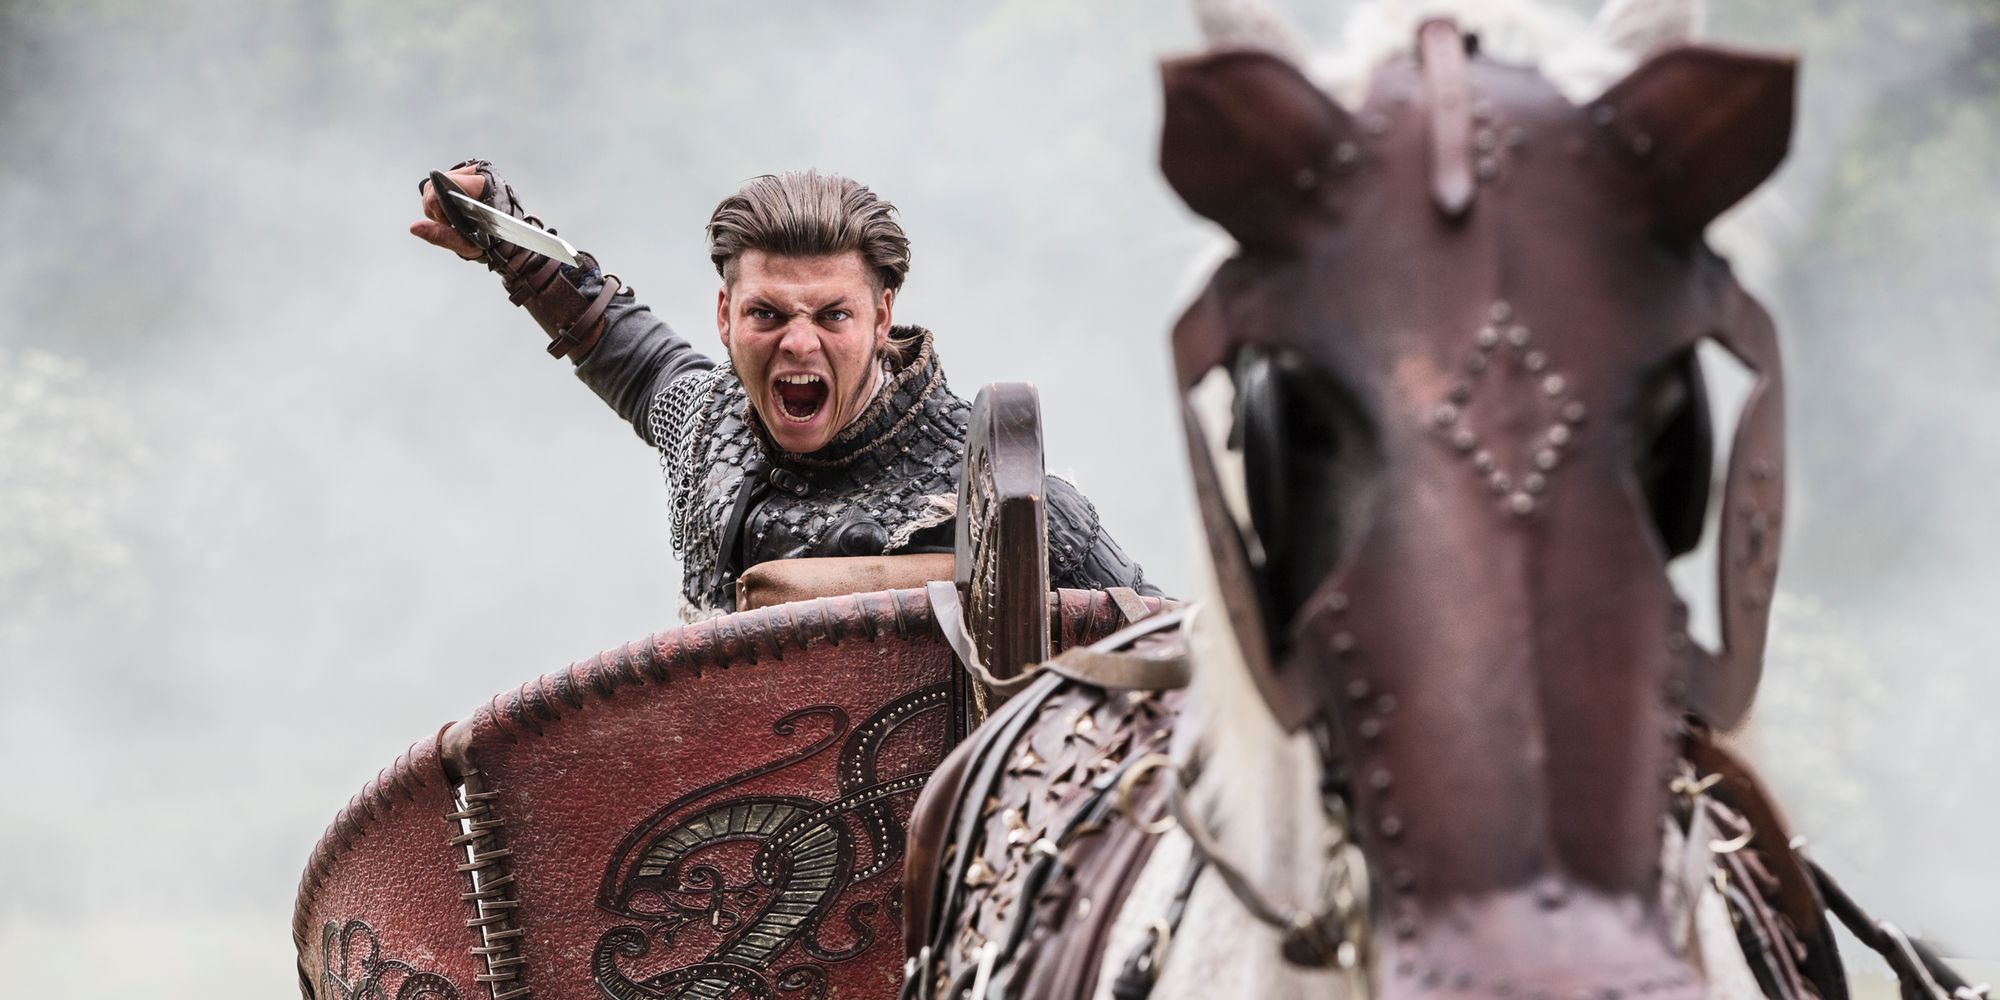 Ivar The Boneless charges towards enemy forces in the battlefield